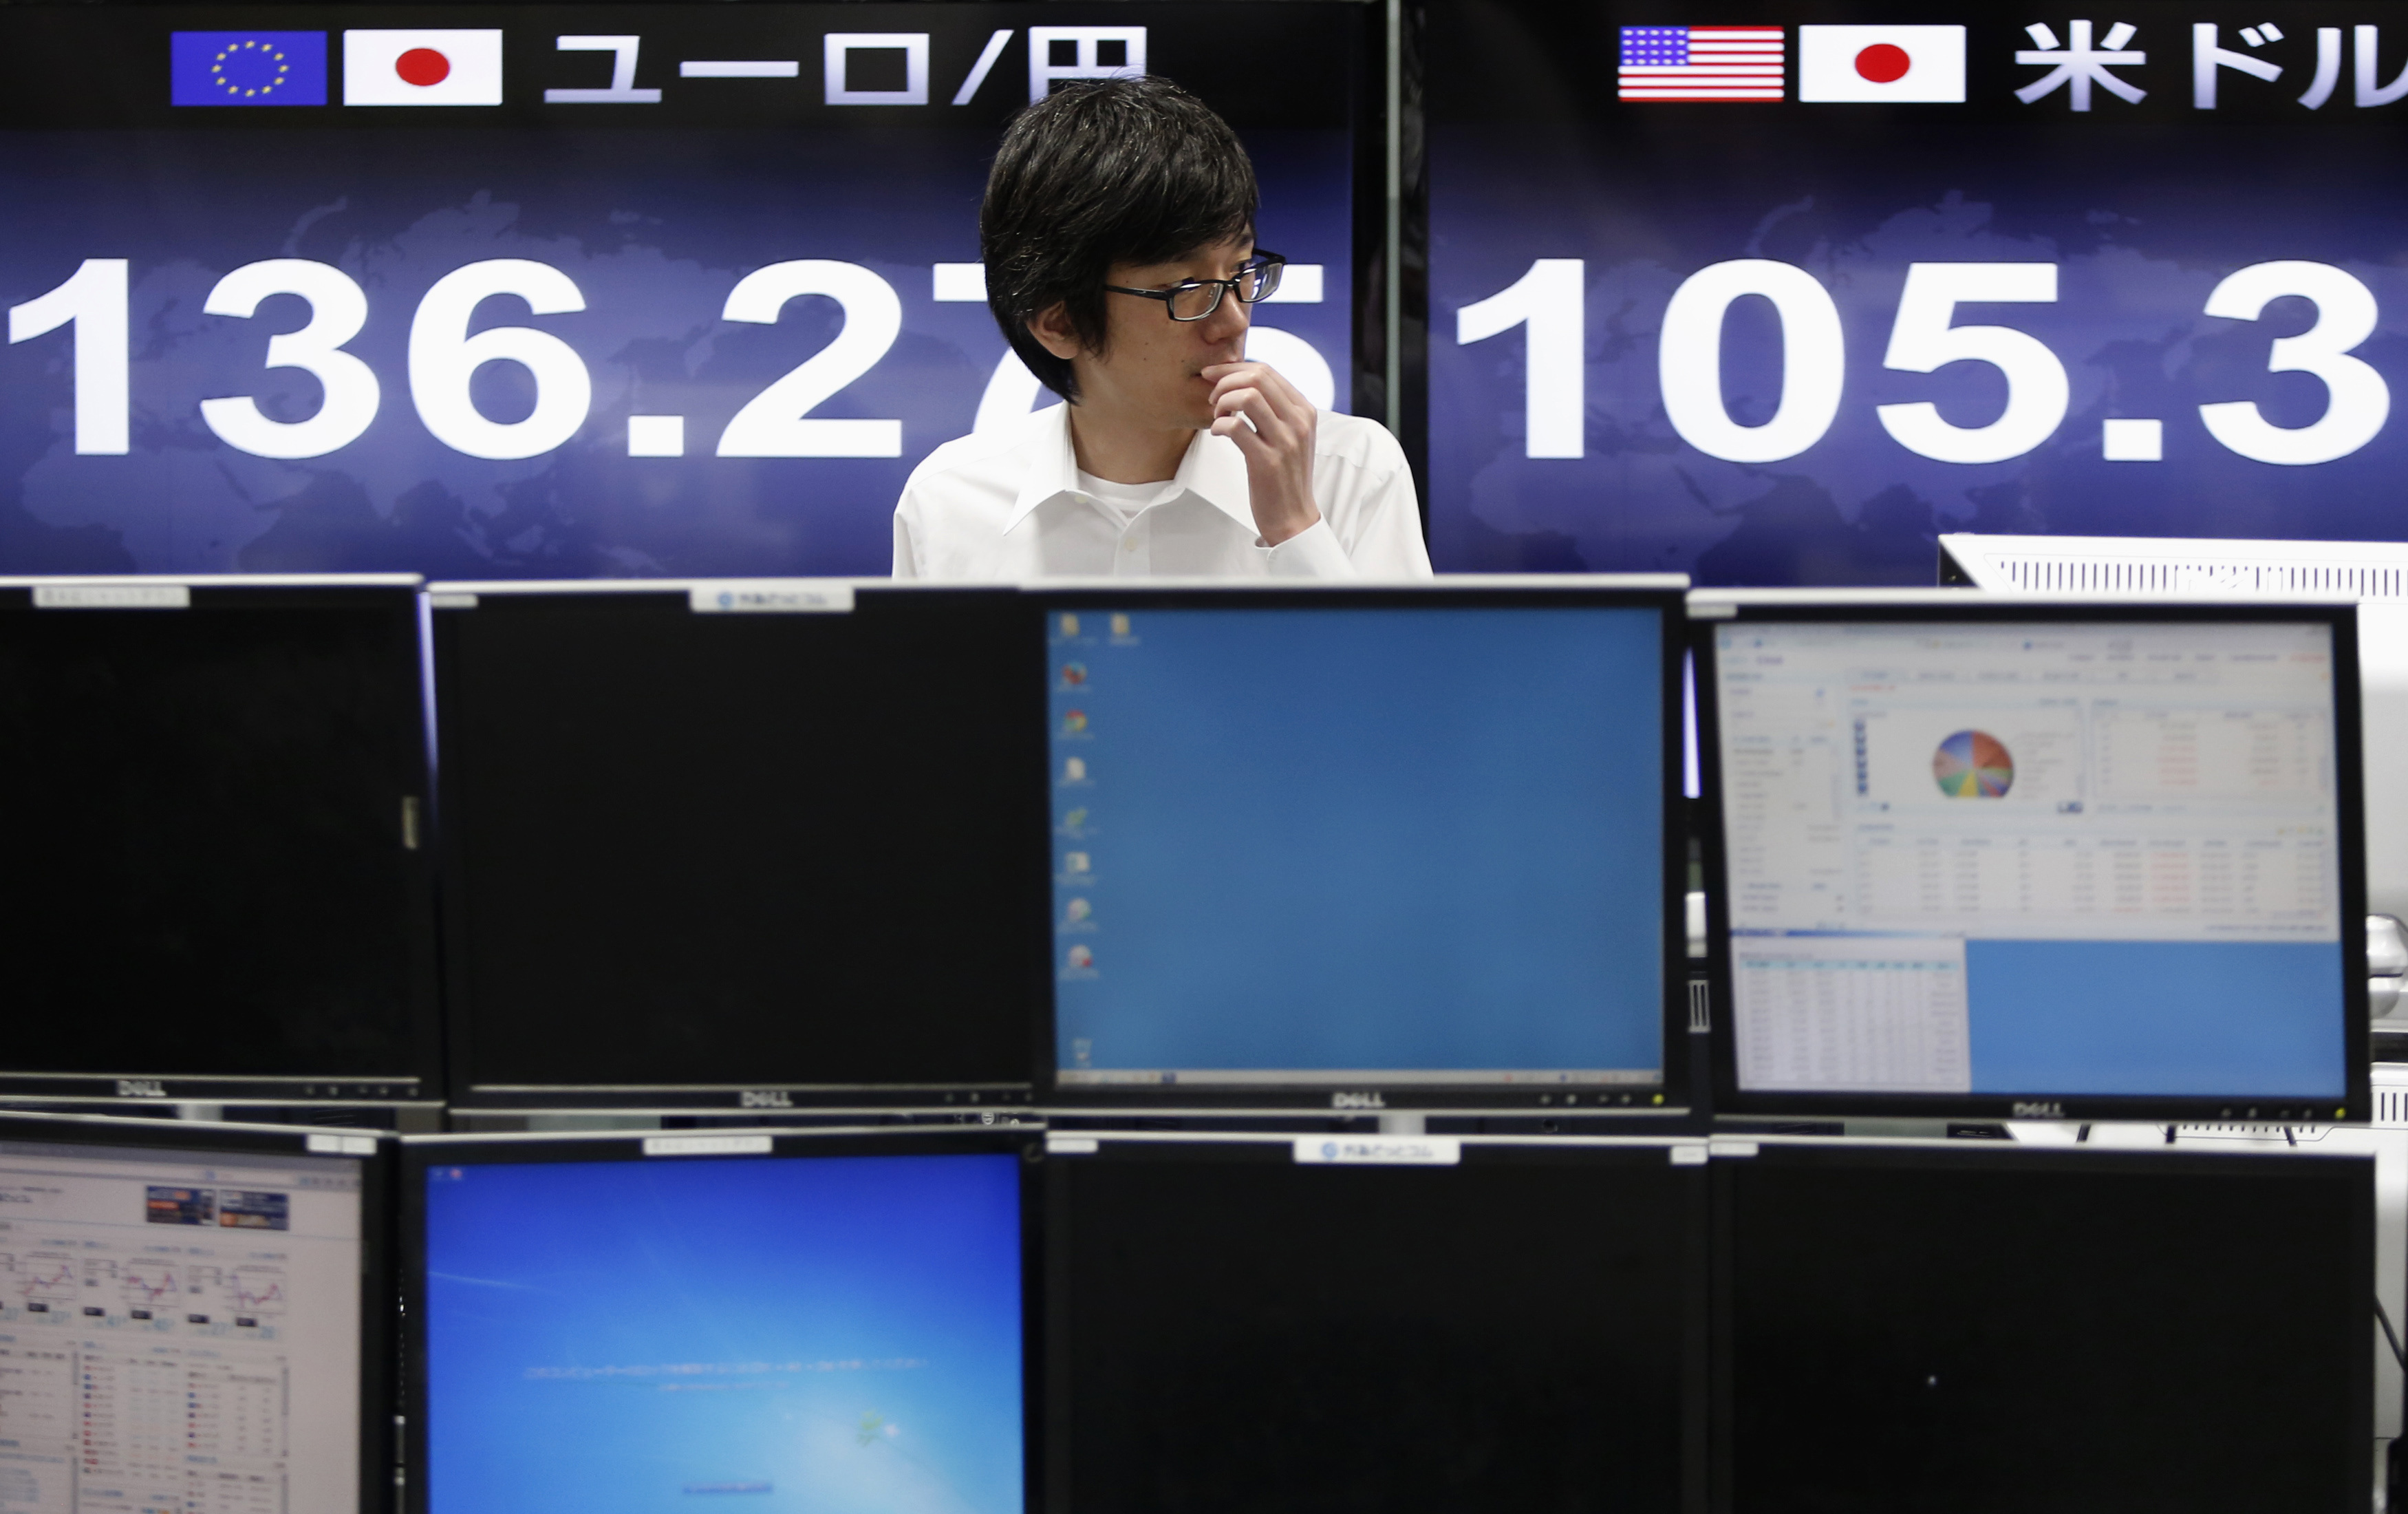 An employee of a foreign exchange trading company stands in front of the monitors displaying exchange rates in Tokyo